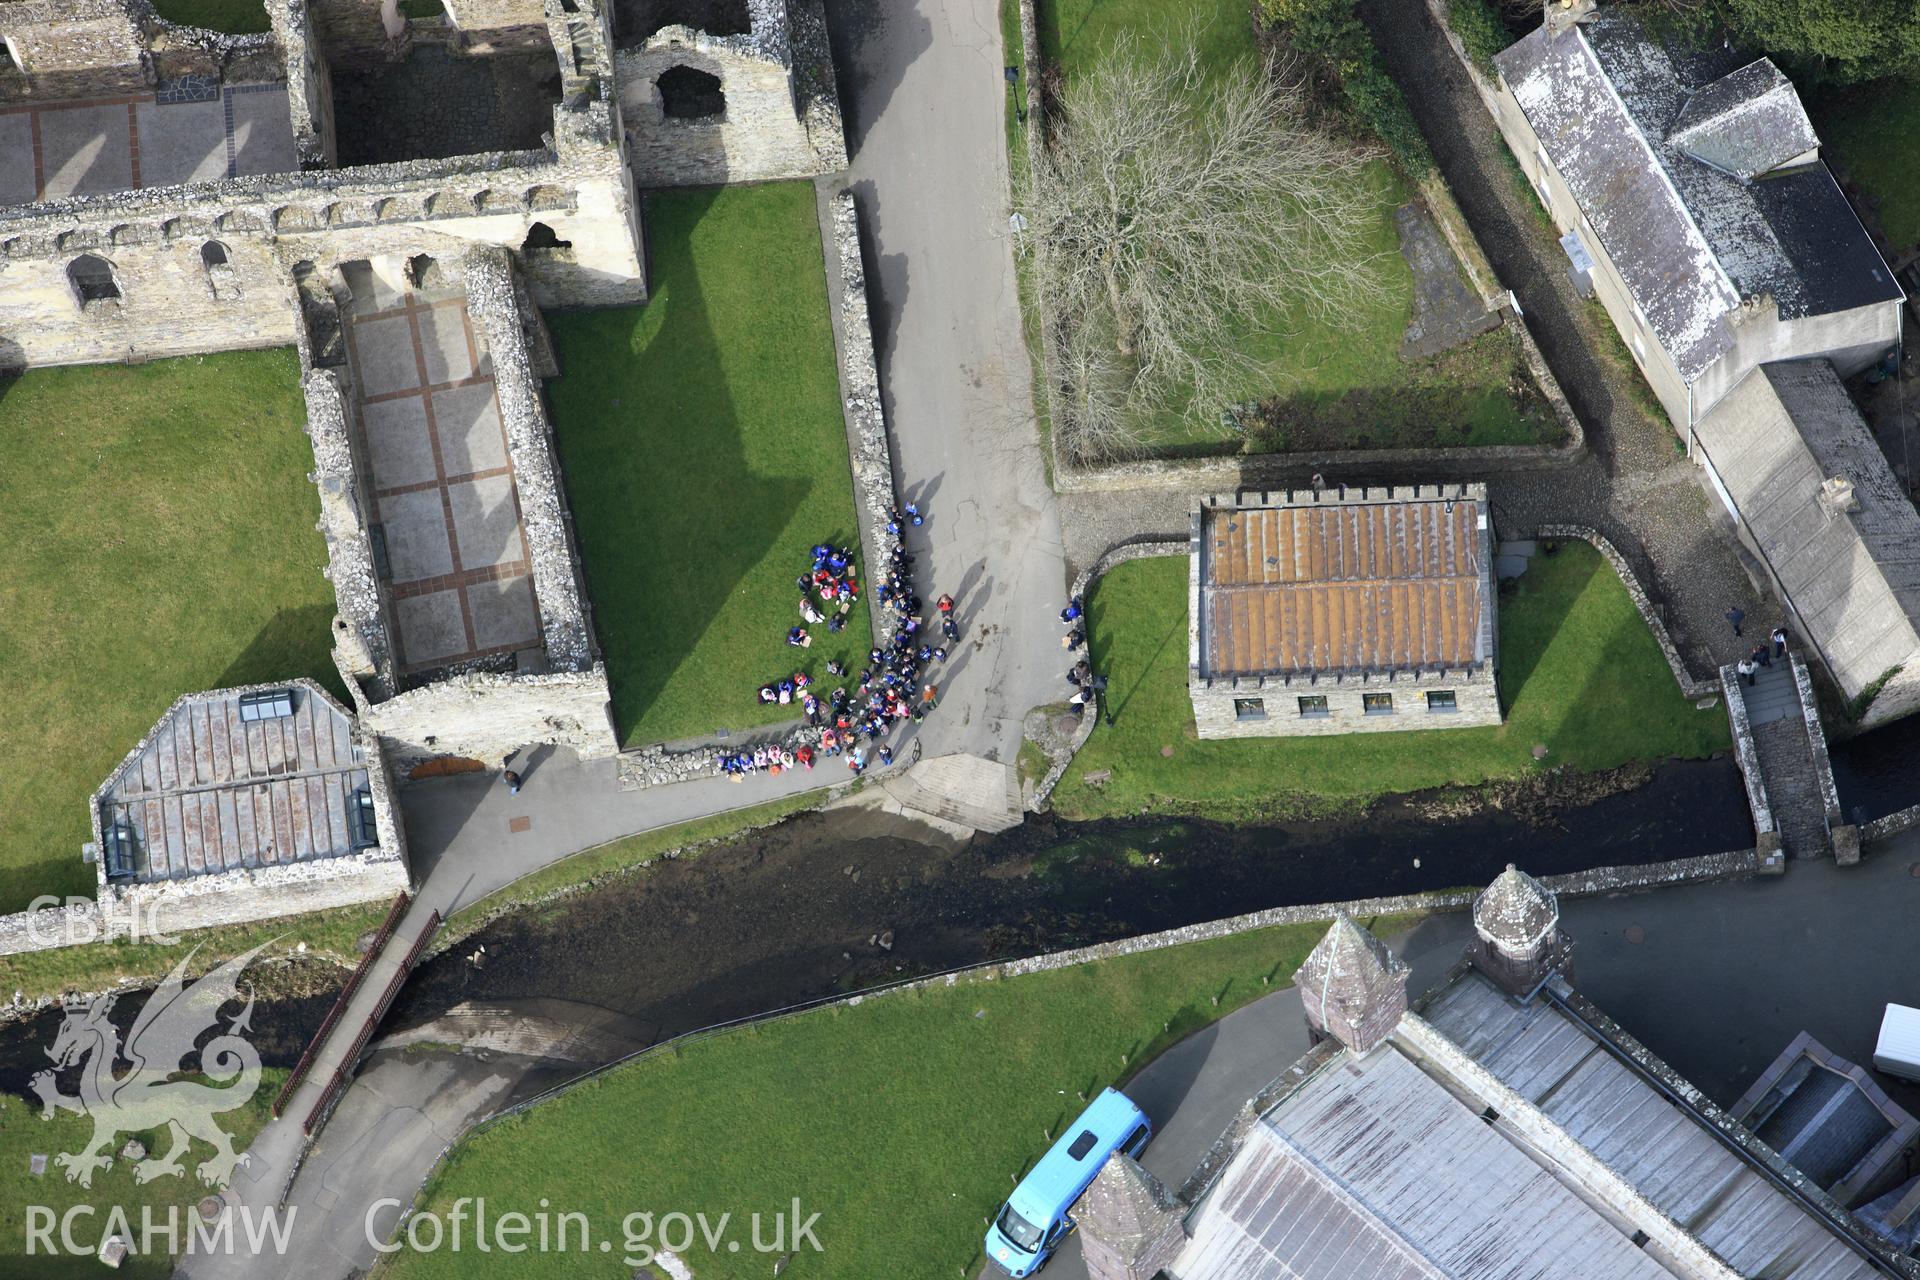 RCAHMW colour oblique aerial photograph of St Davids Bishops Palace. Taken on 02 March 2010 by Toby Driver